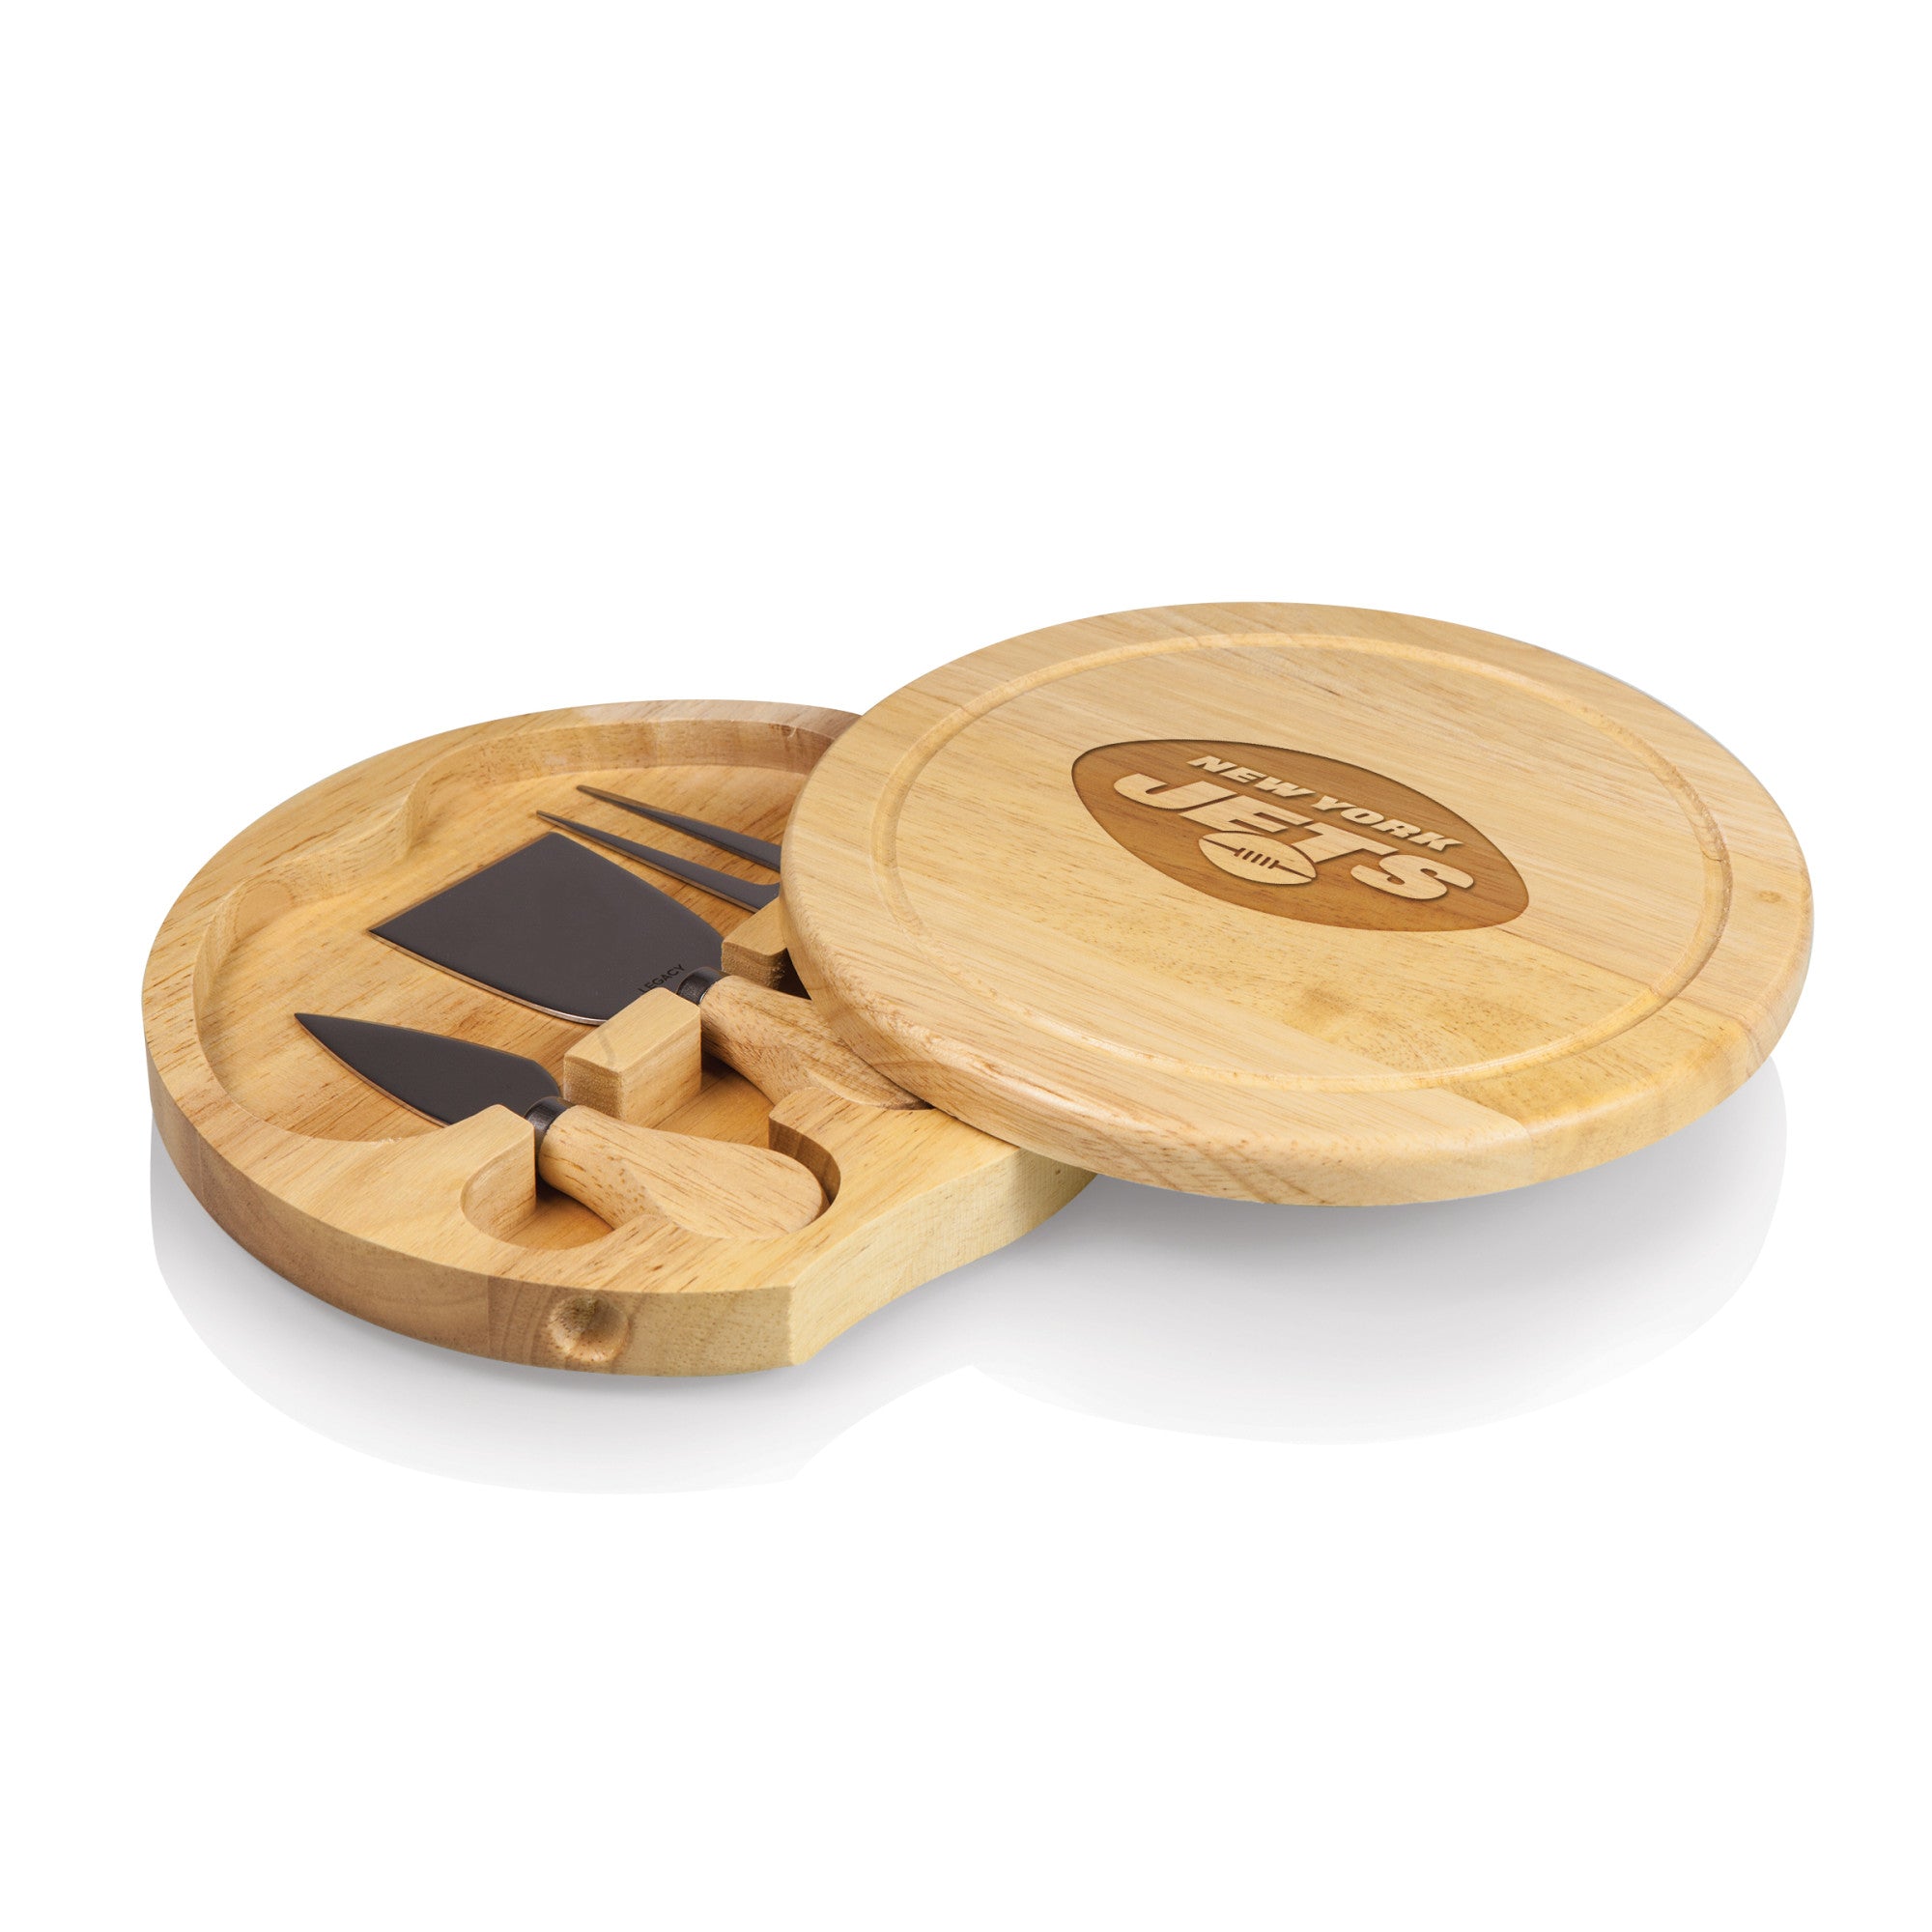 New York Jets - Brie Cheese Cutting Board & Tools Set